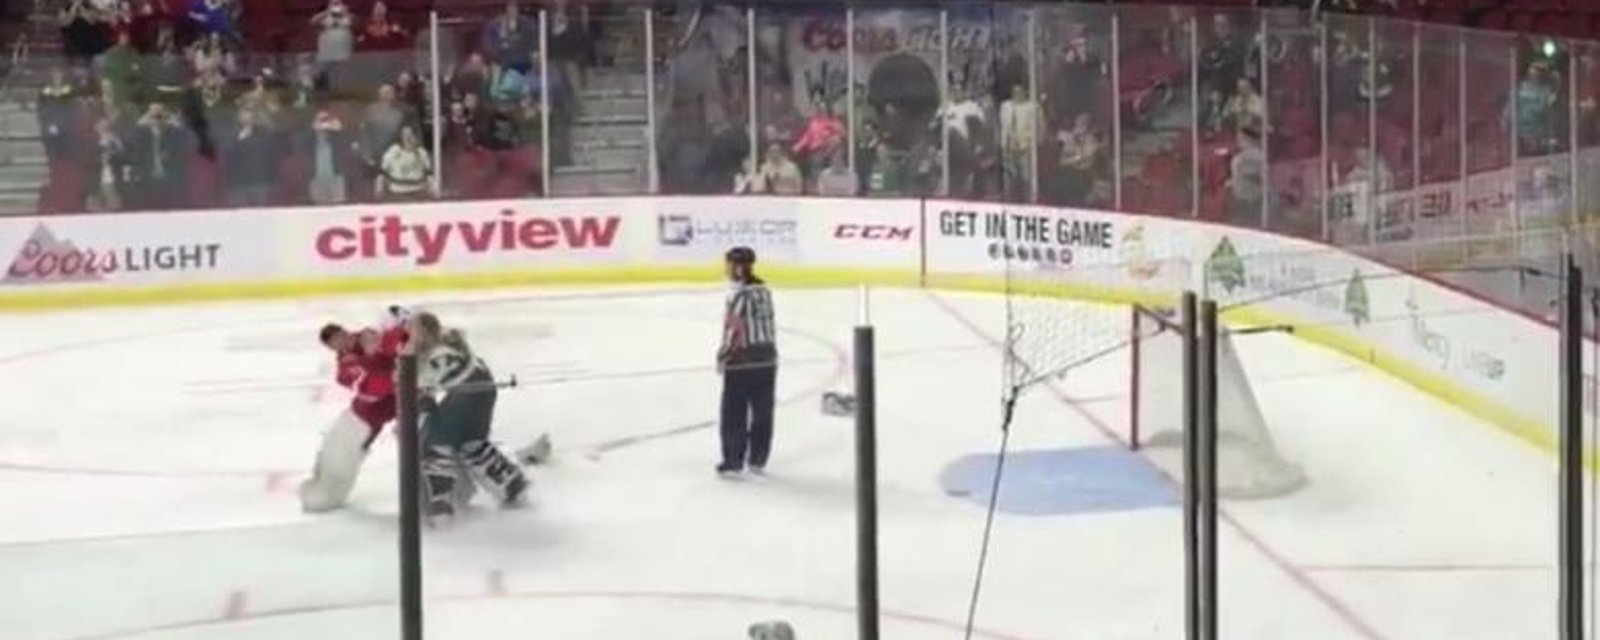 NHL prospect makes his debut, drops the gloves. Oh and he's a goalie.